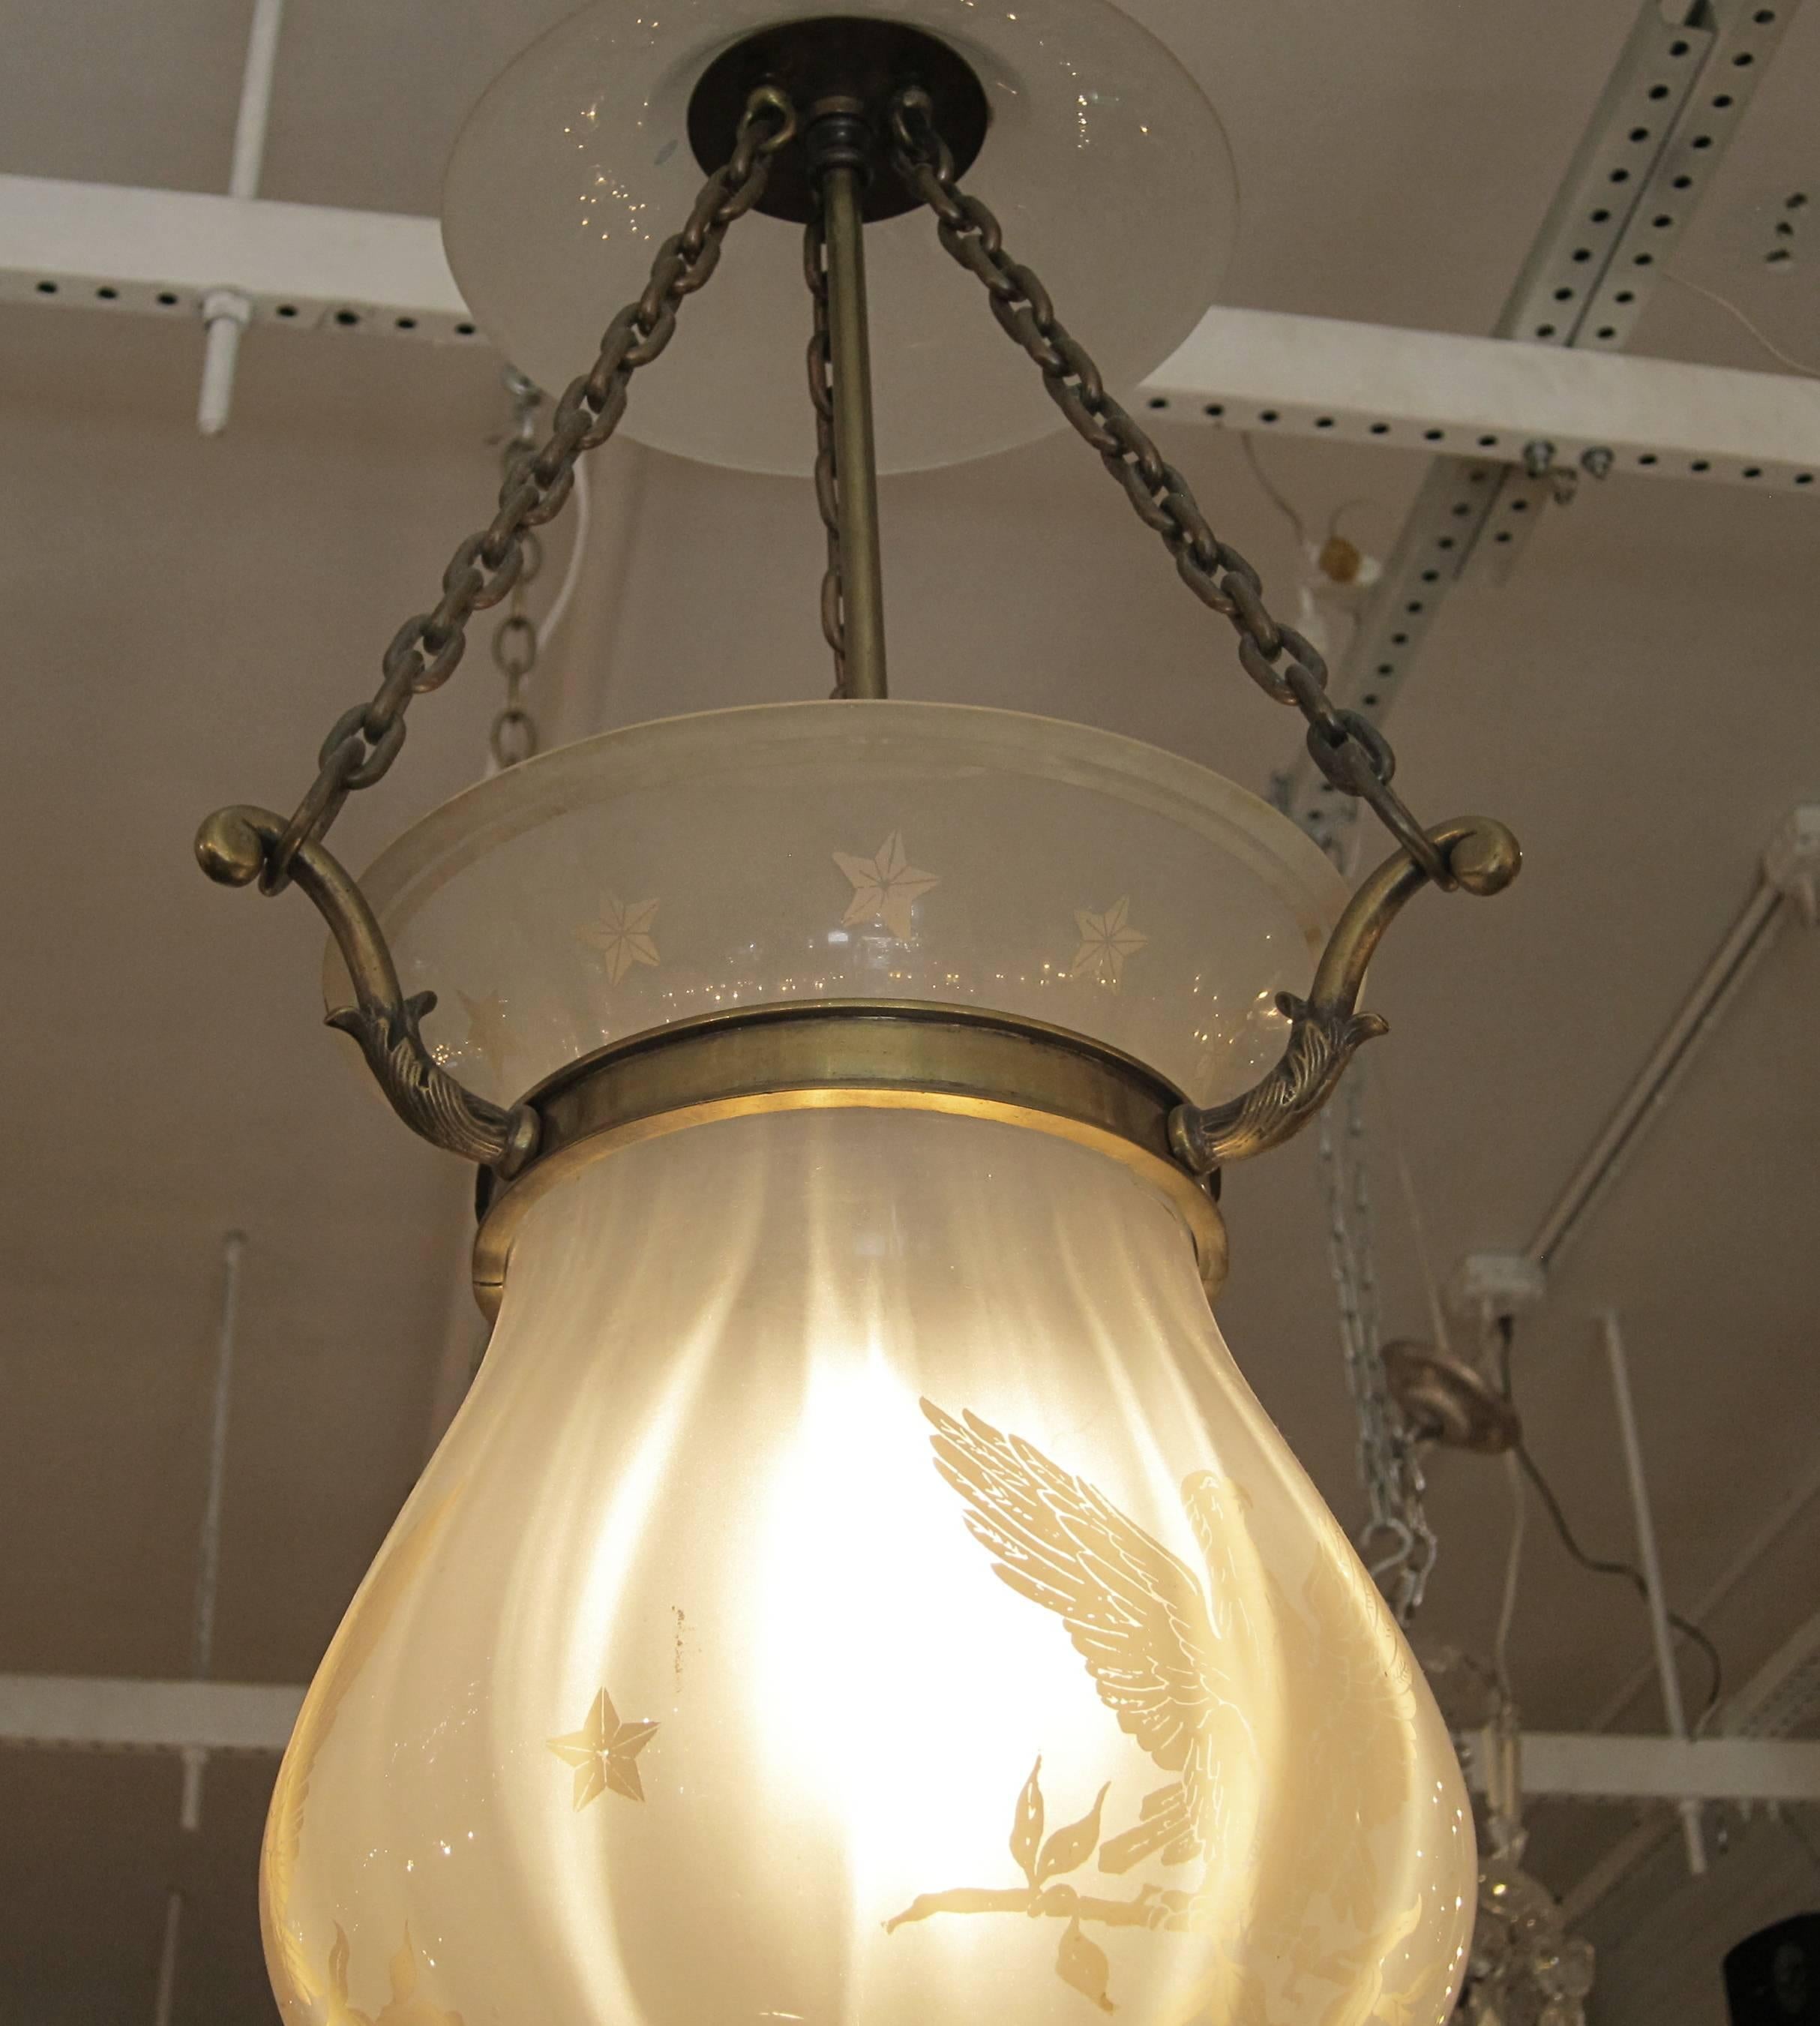 1930s American made bell jar light. This item can be viewed at our 5 East 16th Street Union Square location in Manhattan.